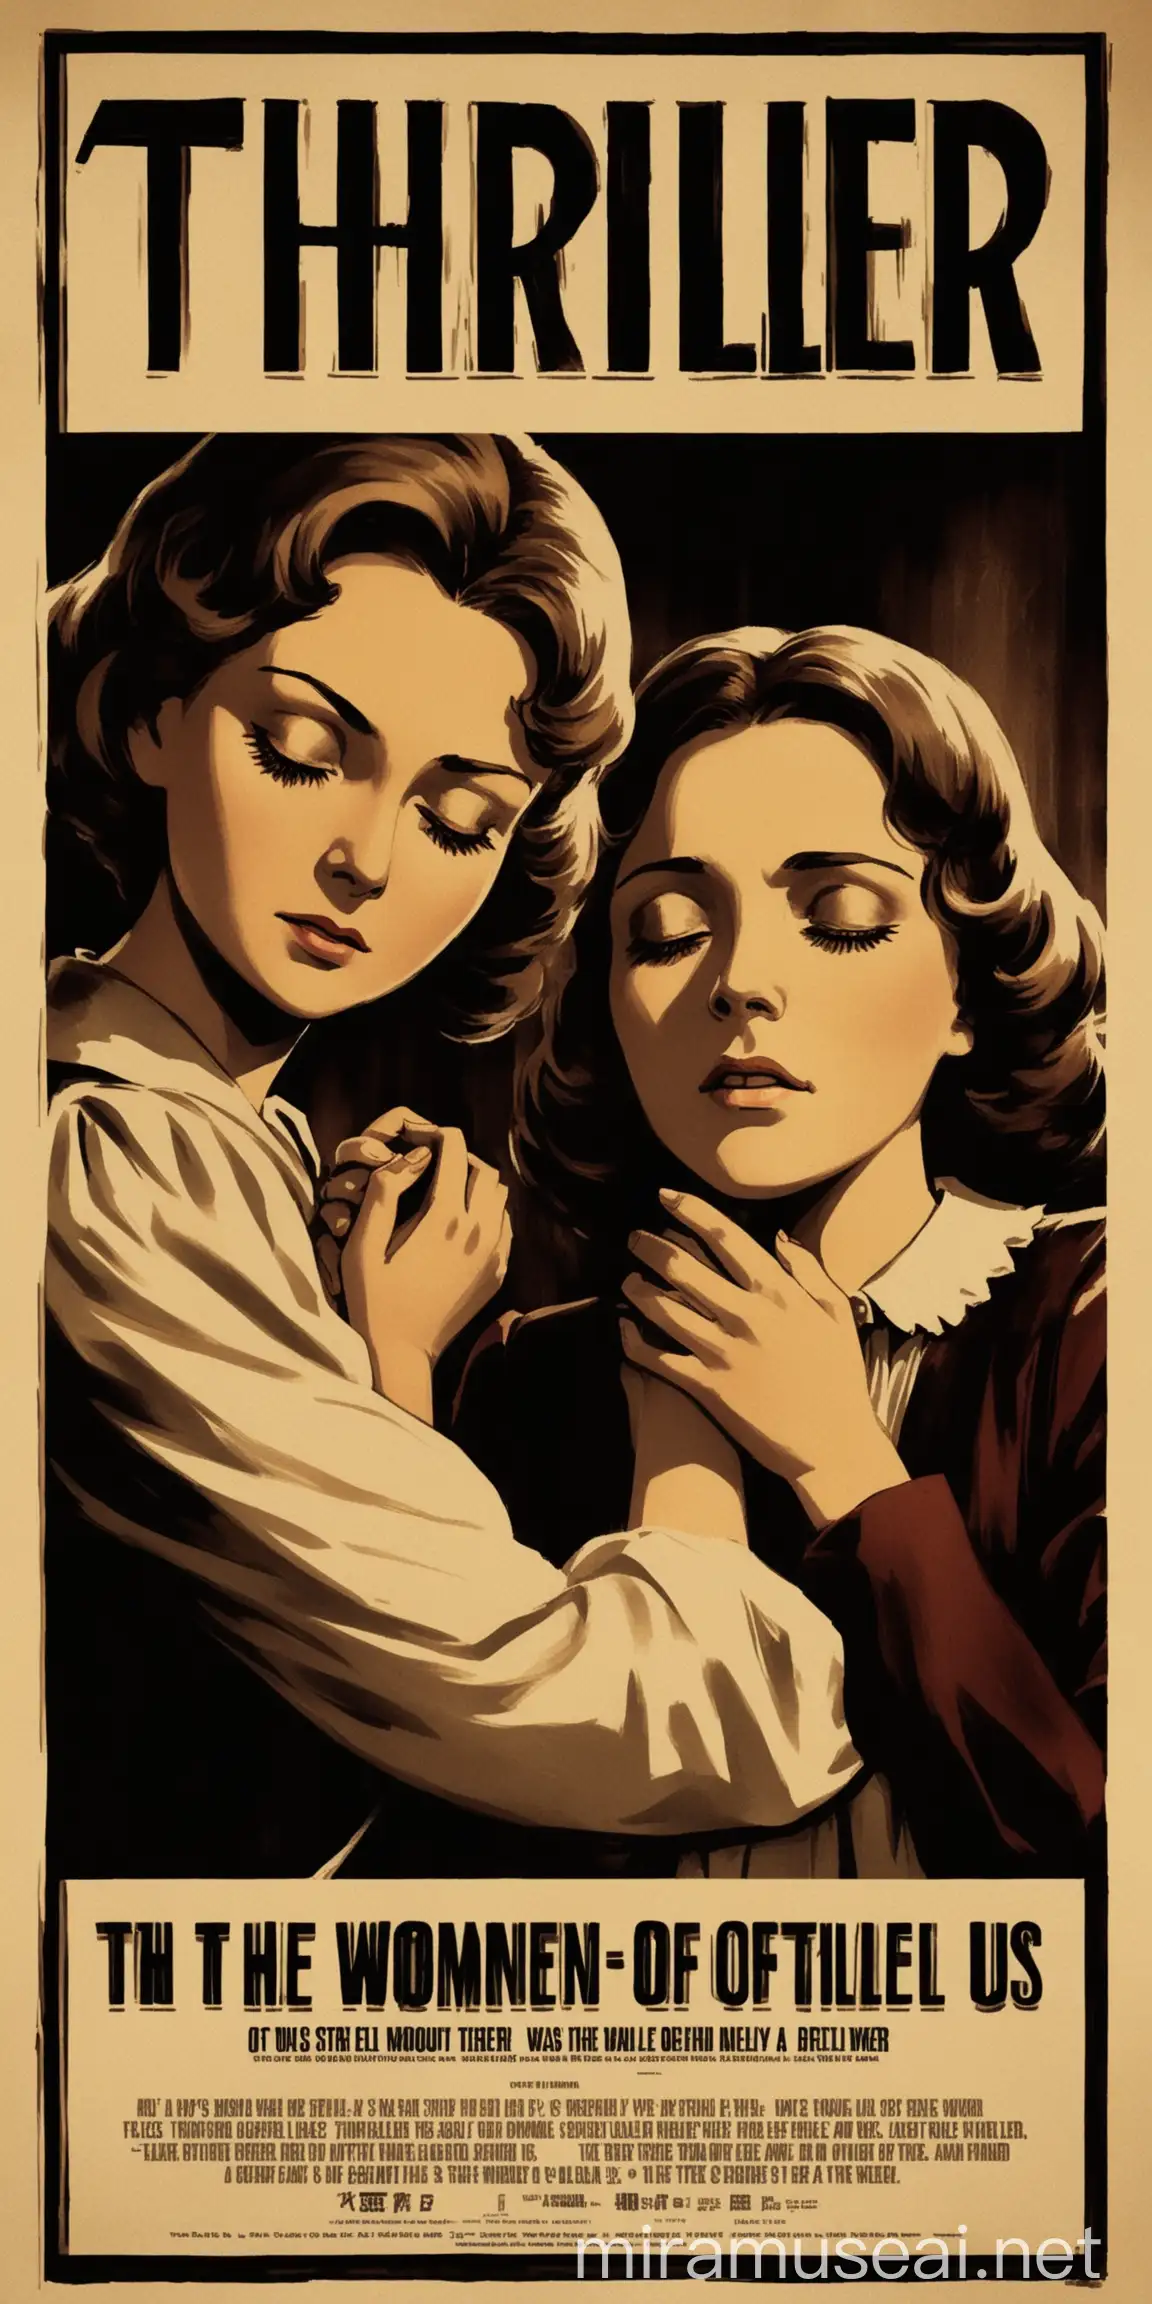 Vintage Thriller Movie Poster Featuring Two Women in Intense Confrontation